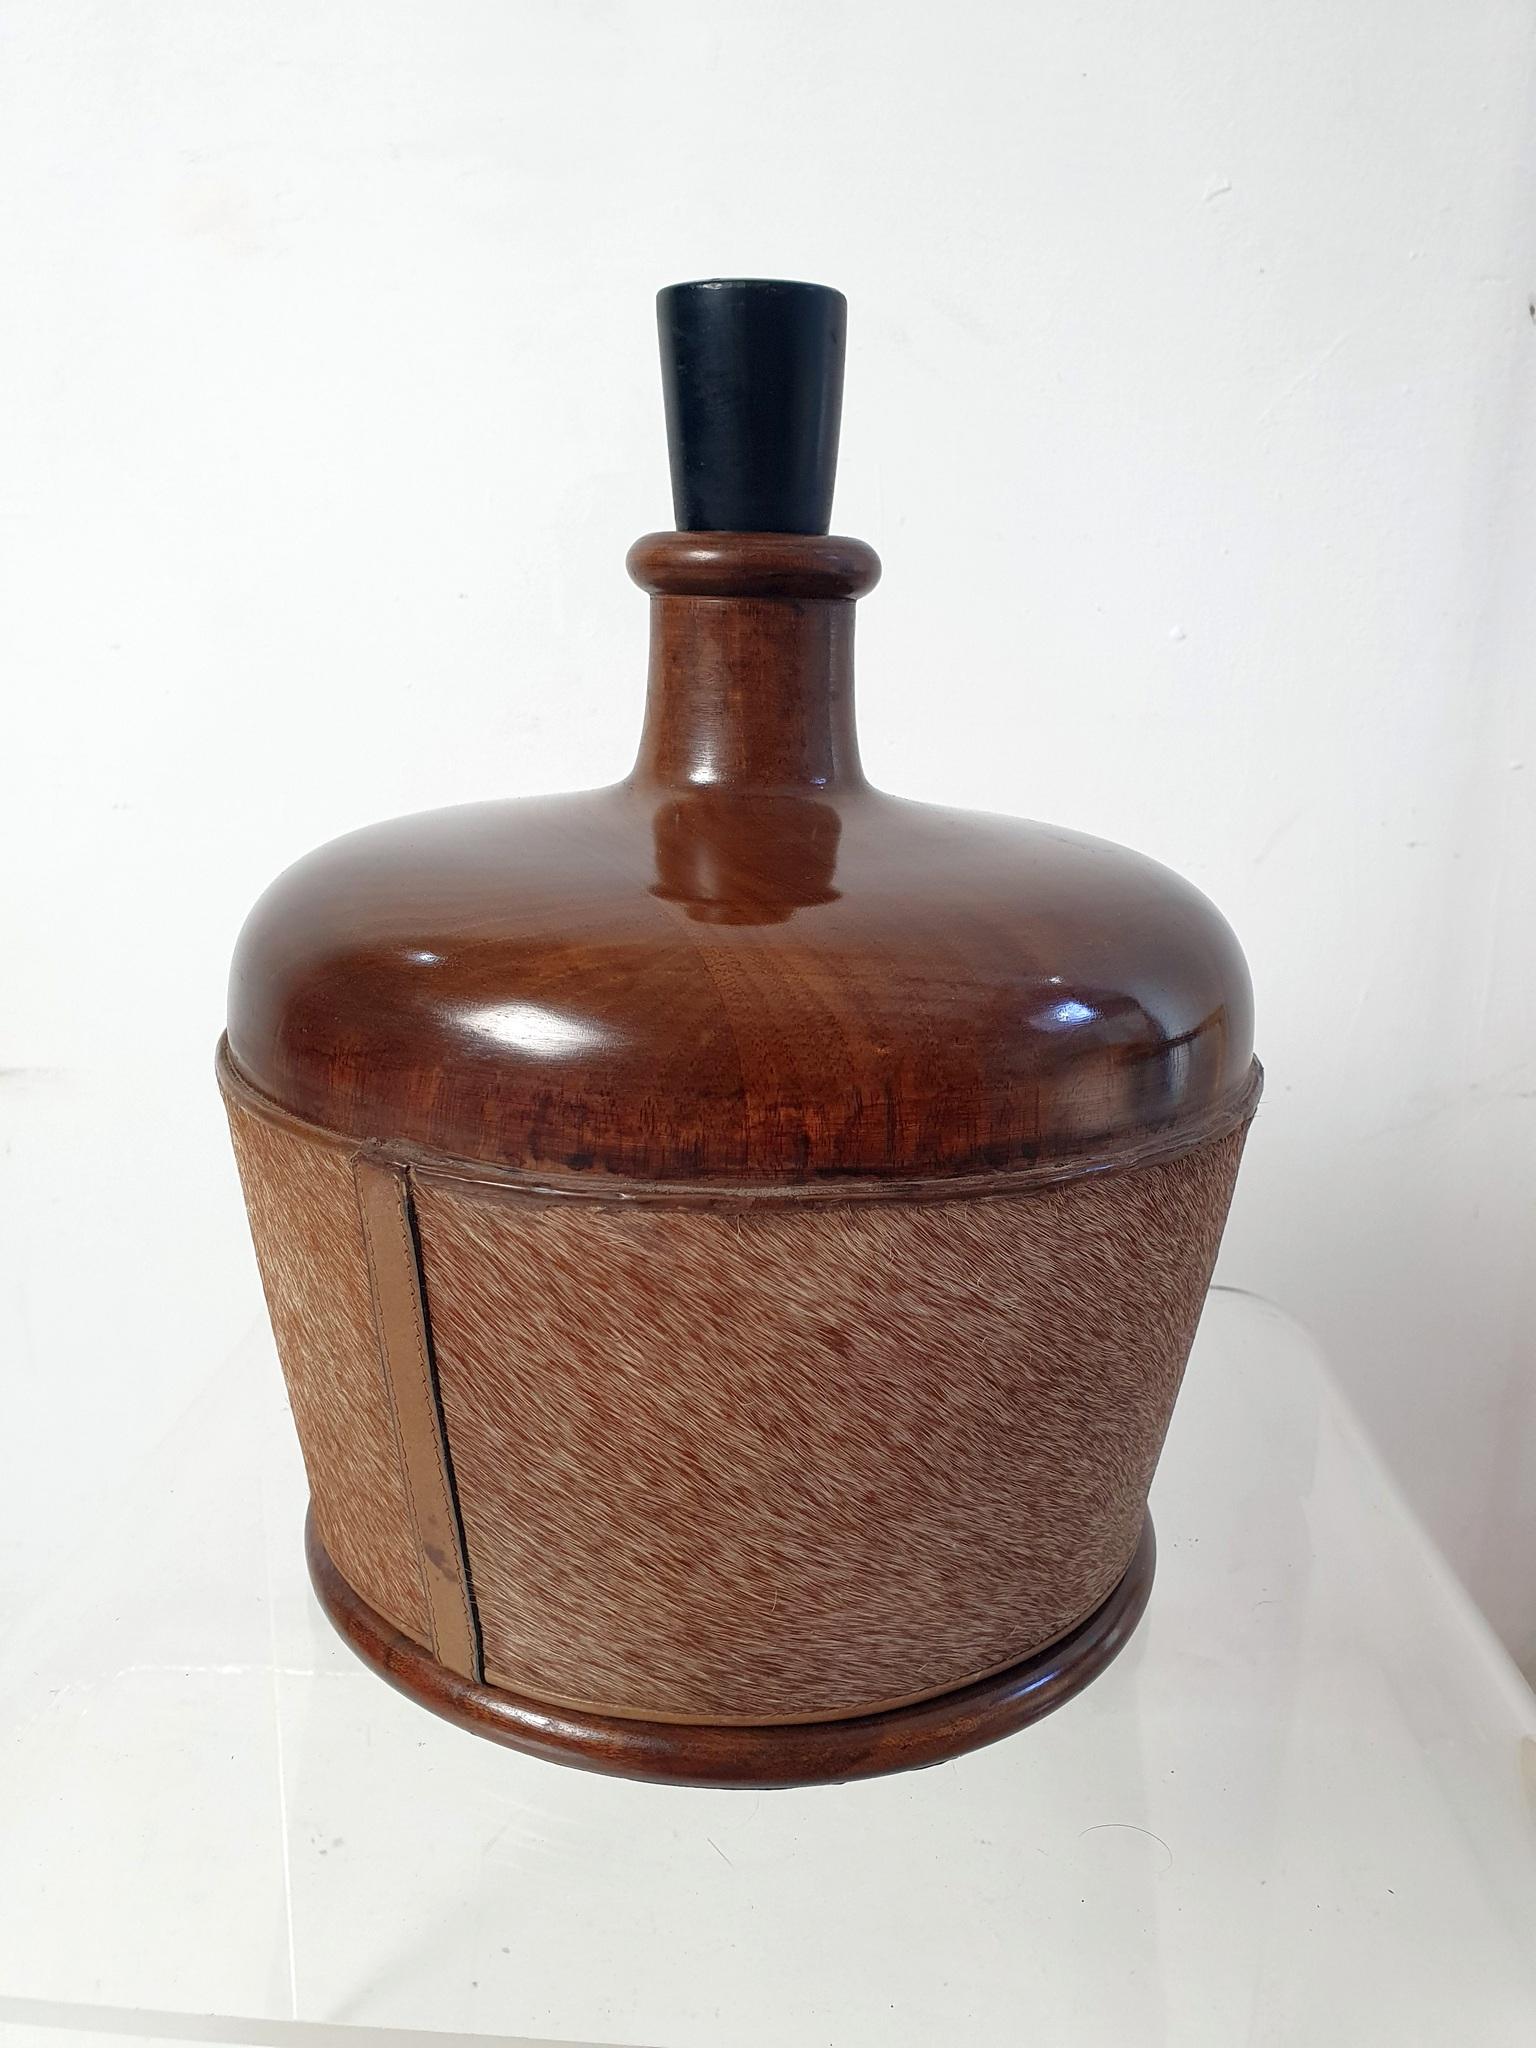 This rare item is designed as a bottle and hides a poker set inside and is a real collectors item. All chips and markers are in place as well as well as the original dice. The bottle is made in wood and decorated with cow hide. 
We had an exact